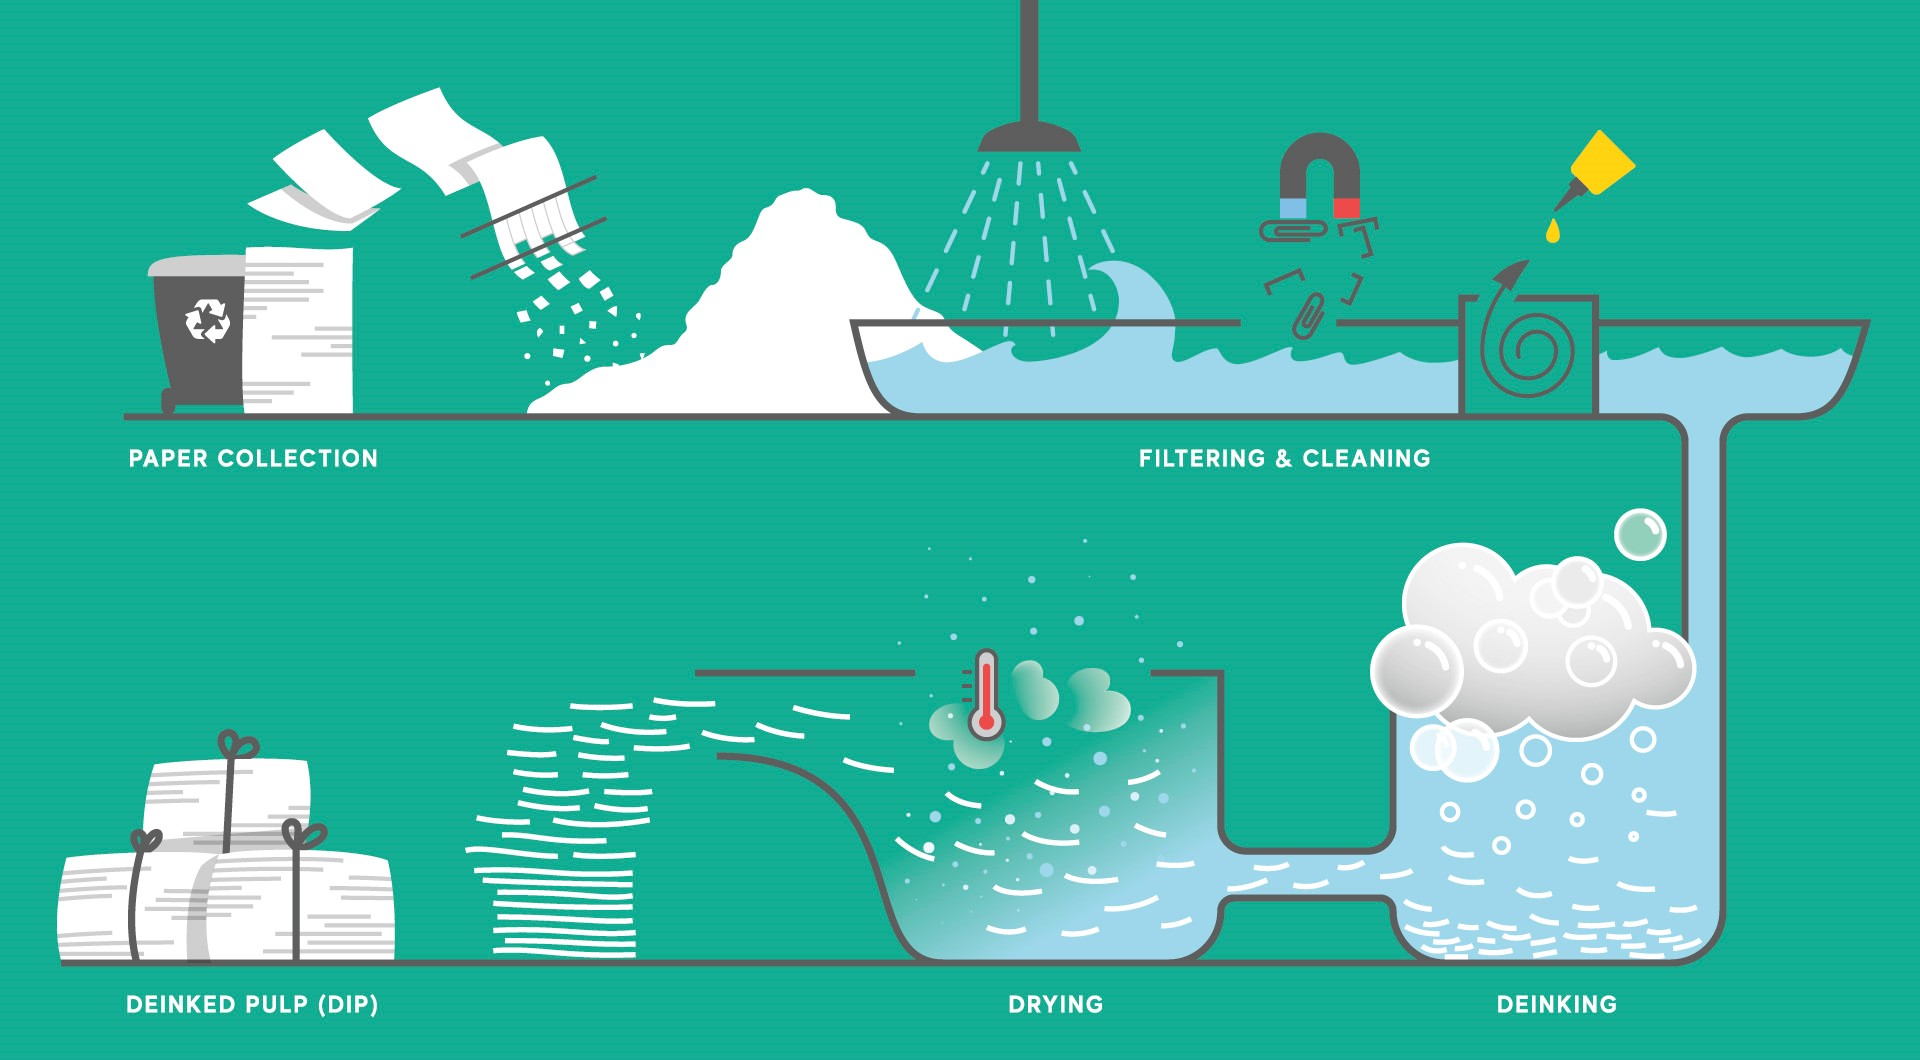 An illustration showing the cycle of paper deinking, from collection, to filtering and cleaning, to deinking, then drying and finally the deinked pulp (DIP) that is used to create new paper.